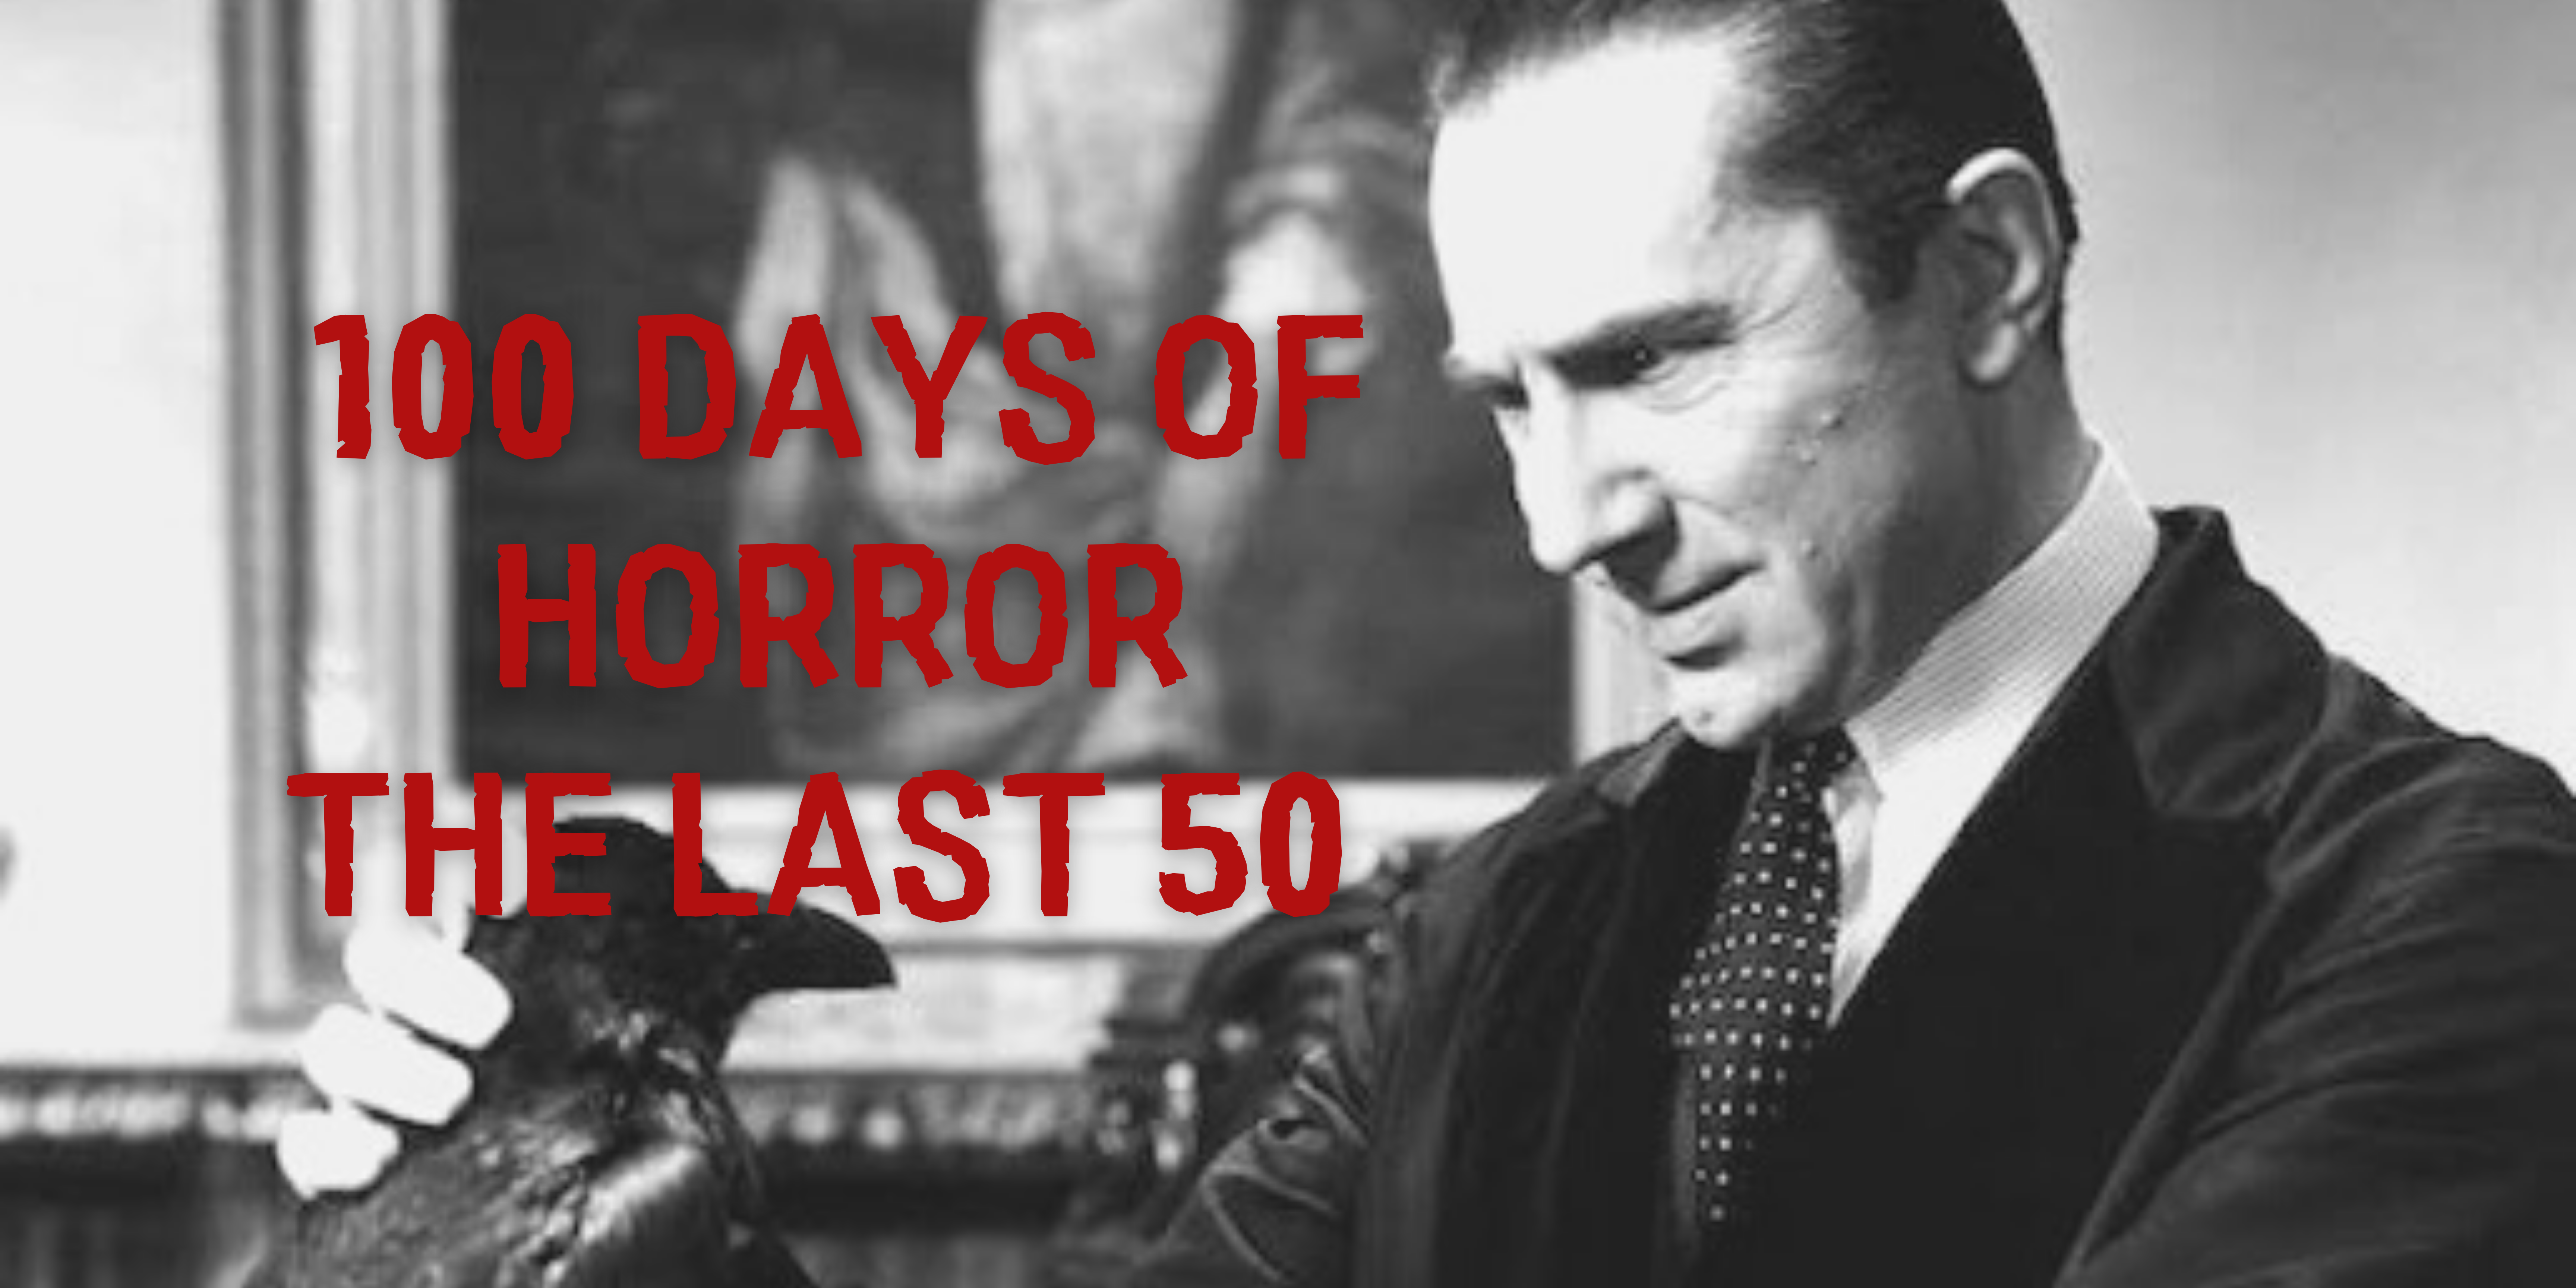 100 DAYS OF HORROR THE LAST 50 pic photo photo